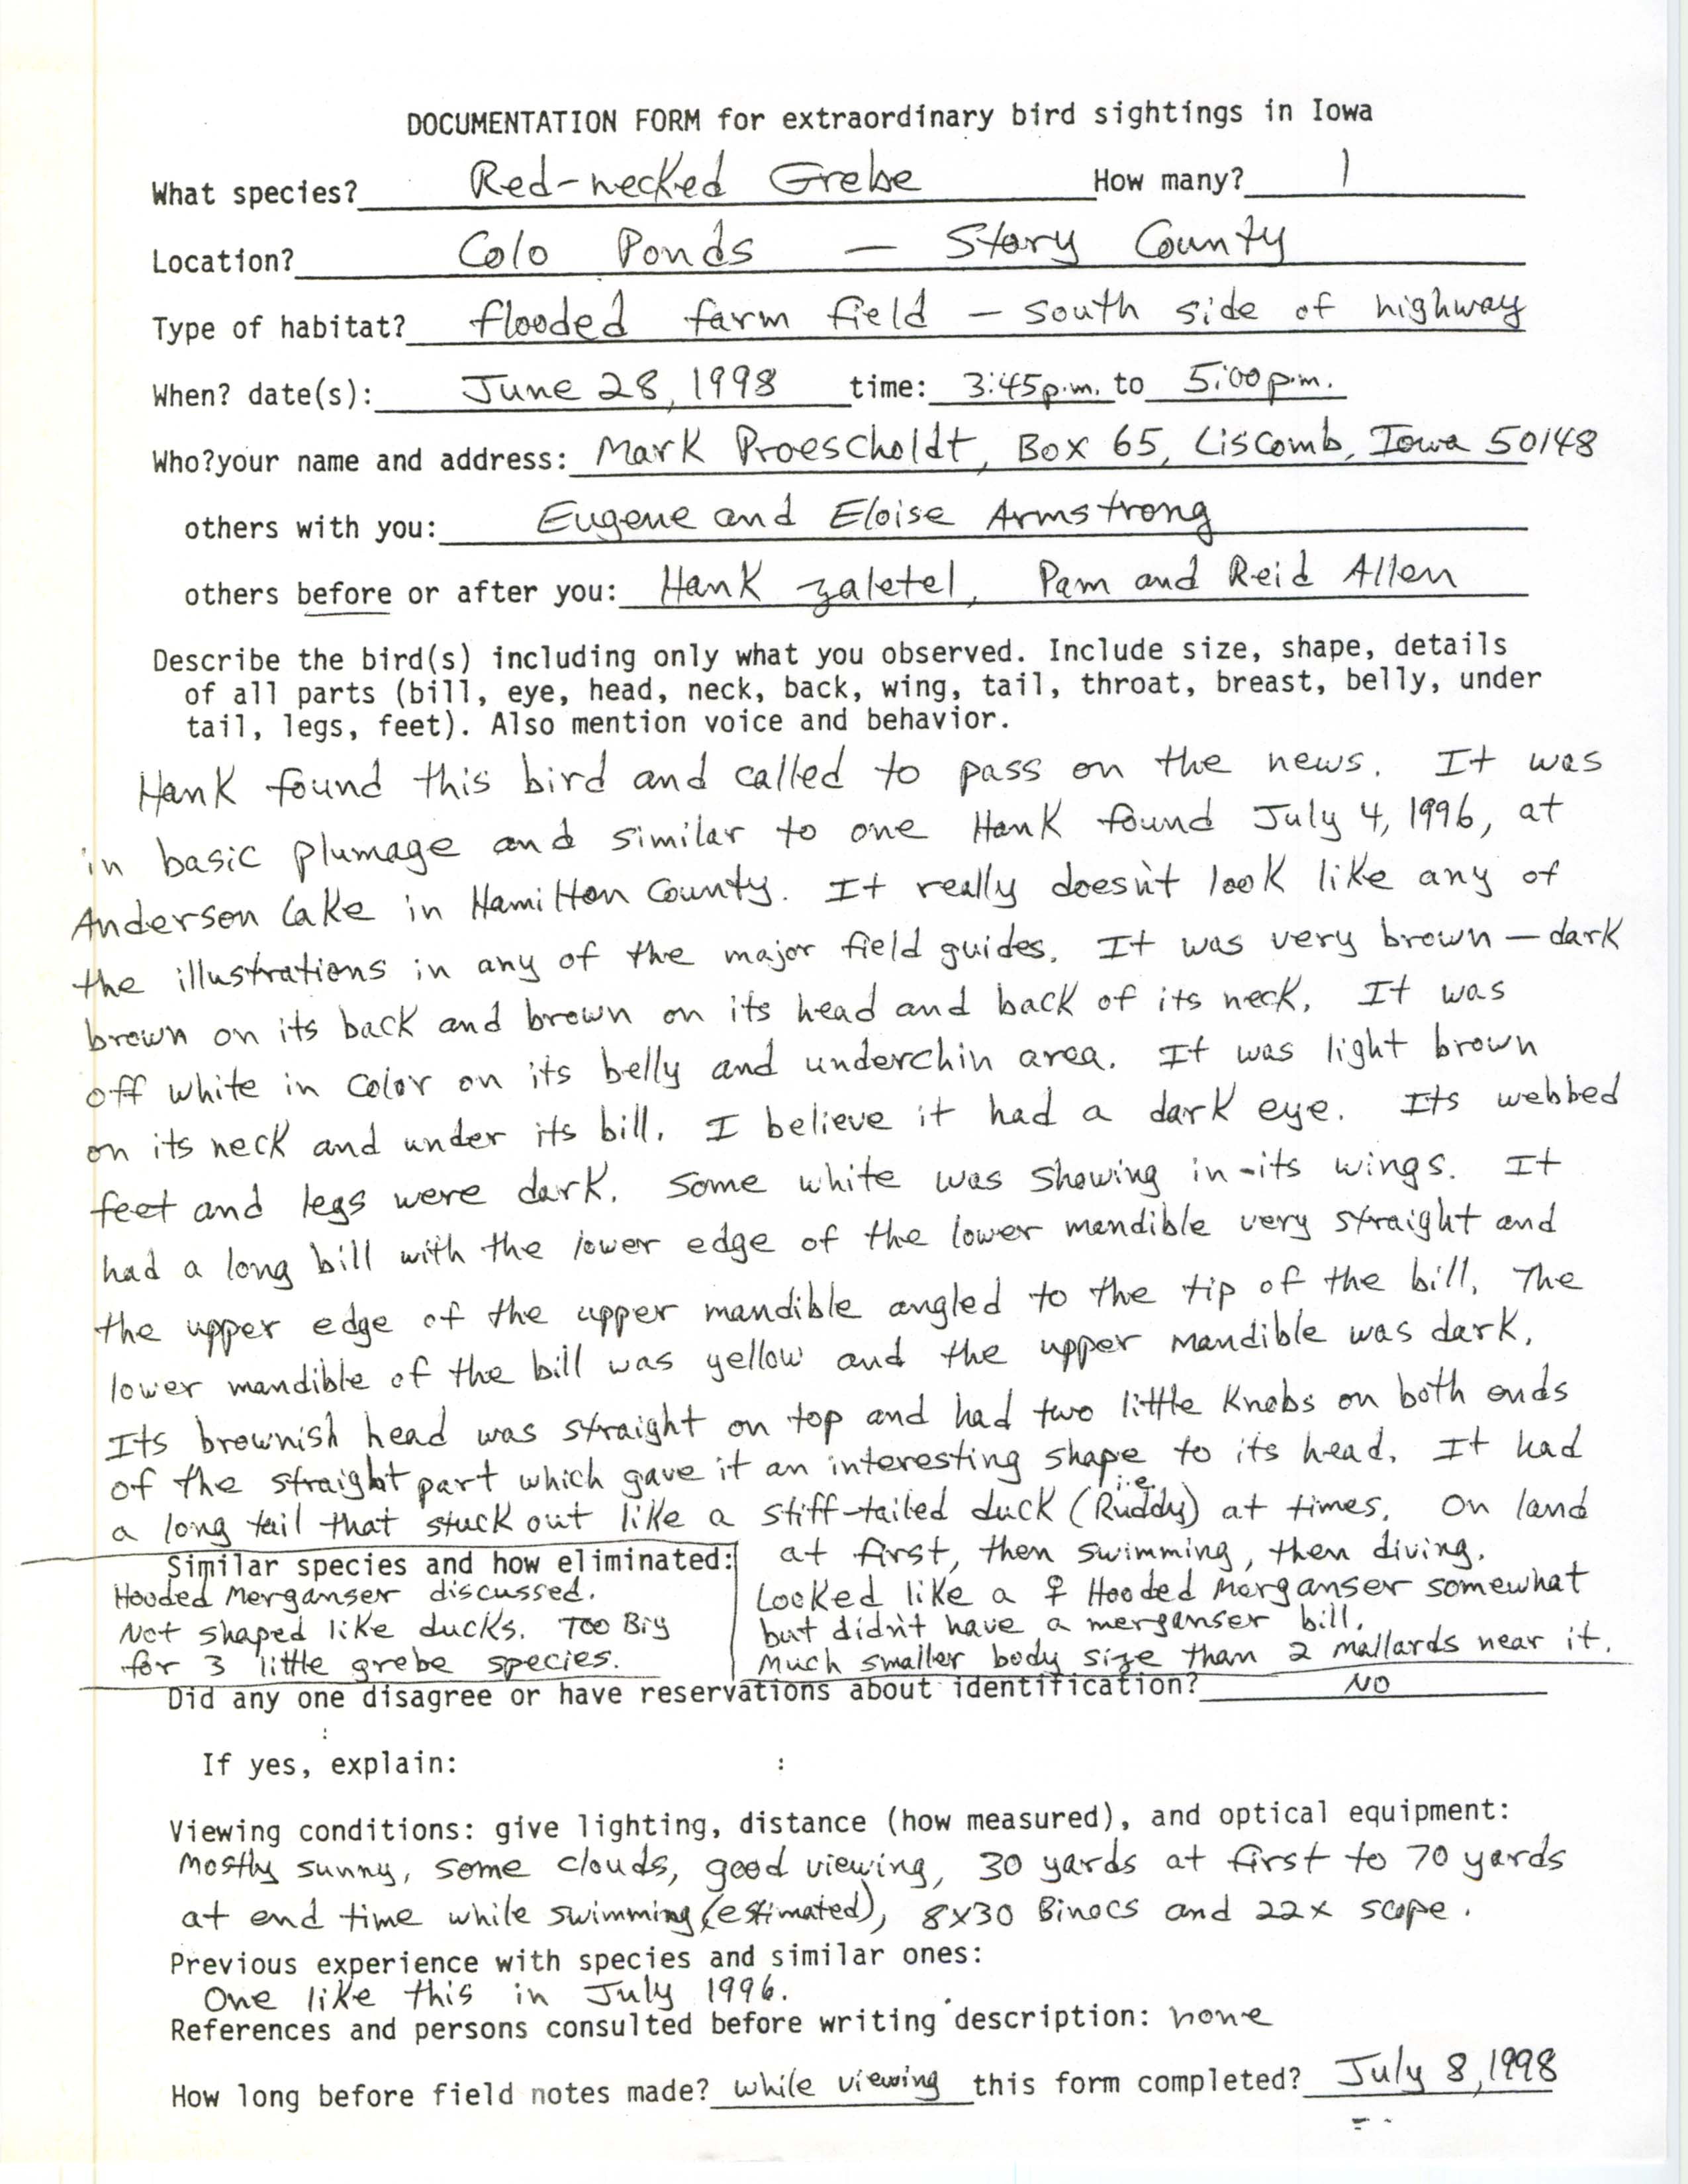 Documentation form for extraordinary bird sightings in Iowa, Red-necked Grebe, June 28, 1998, Mark Proescholdt